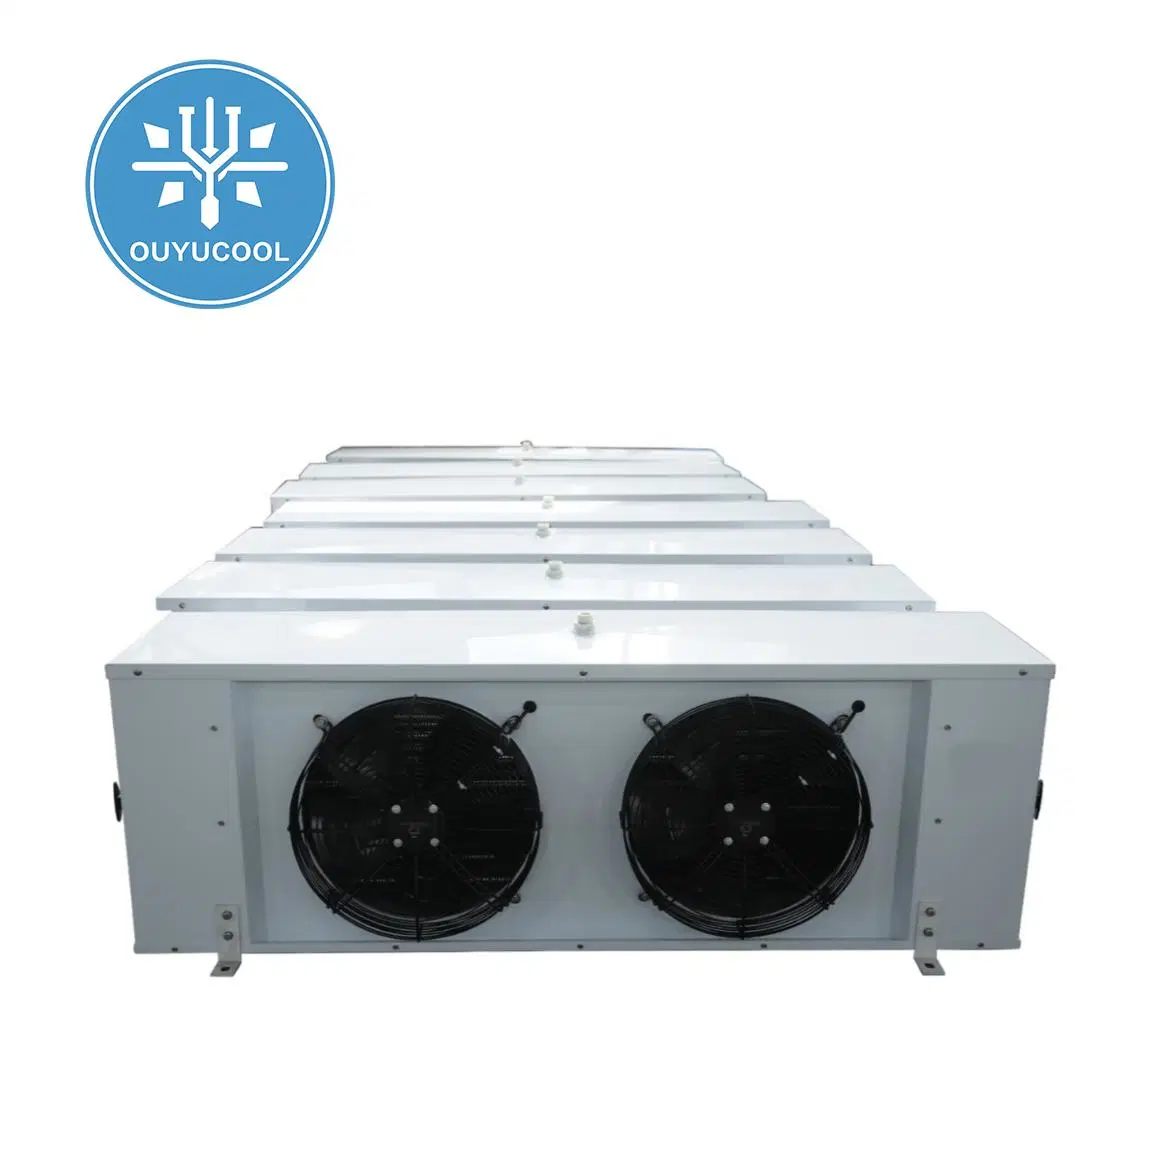 Non-Frost Fin Expansion Evaporator Refrigeration Part for Refrigerator